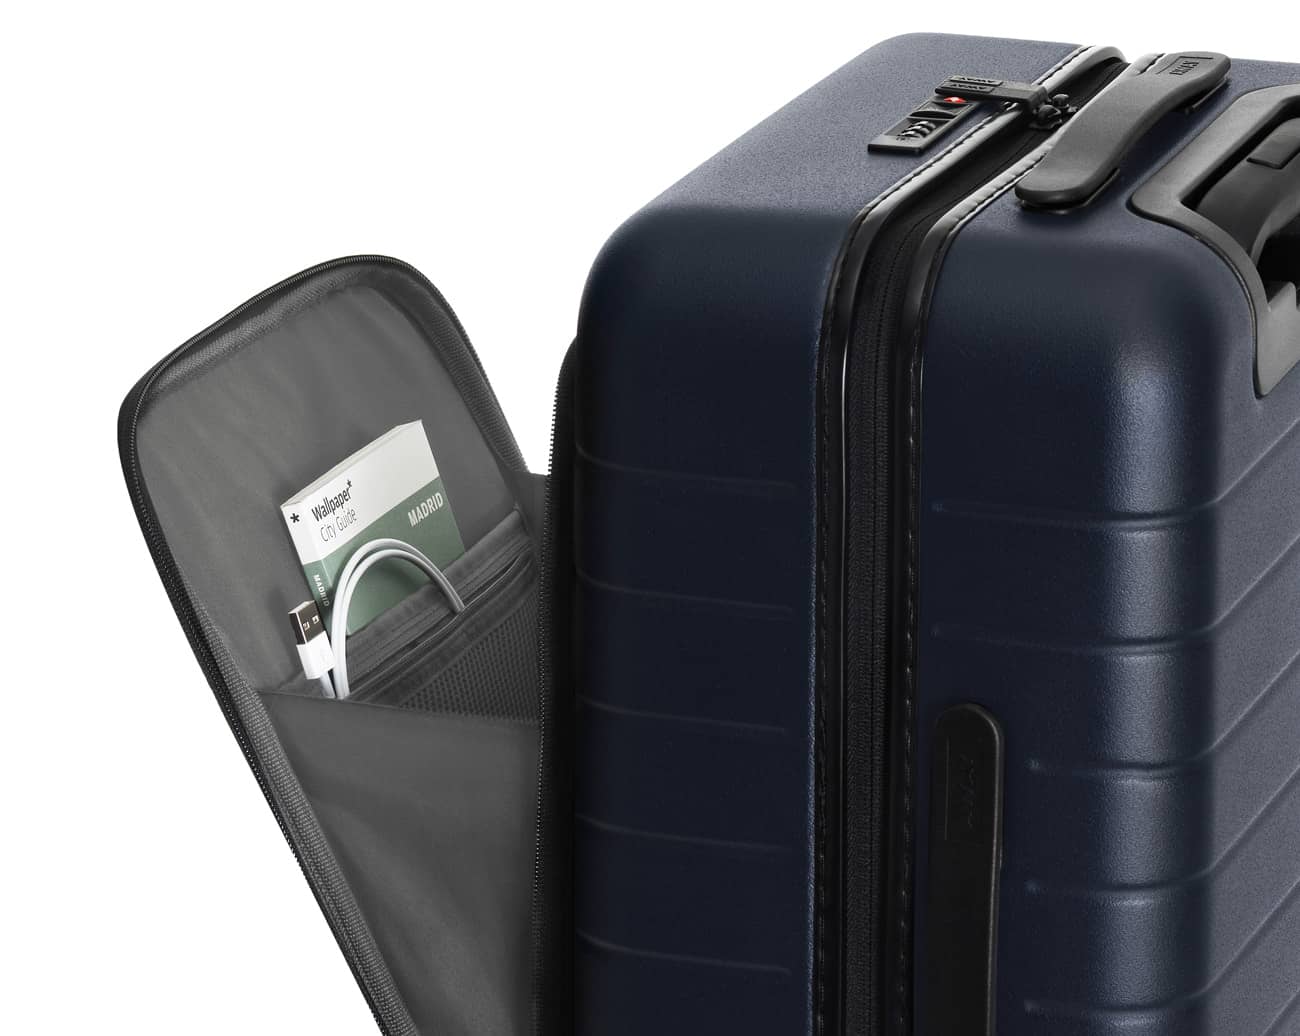 Carry-on luggage with front pocket